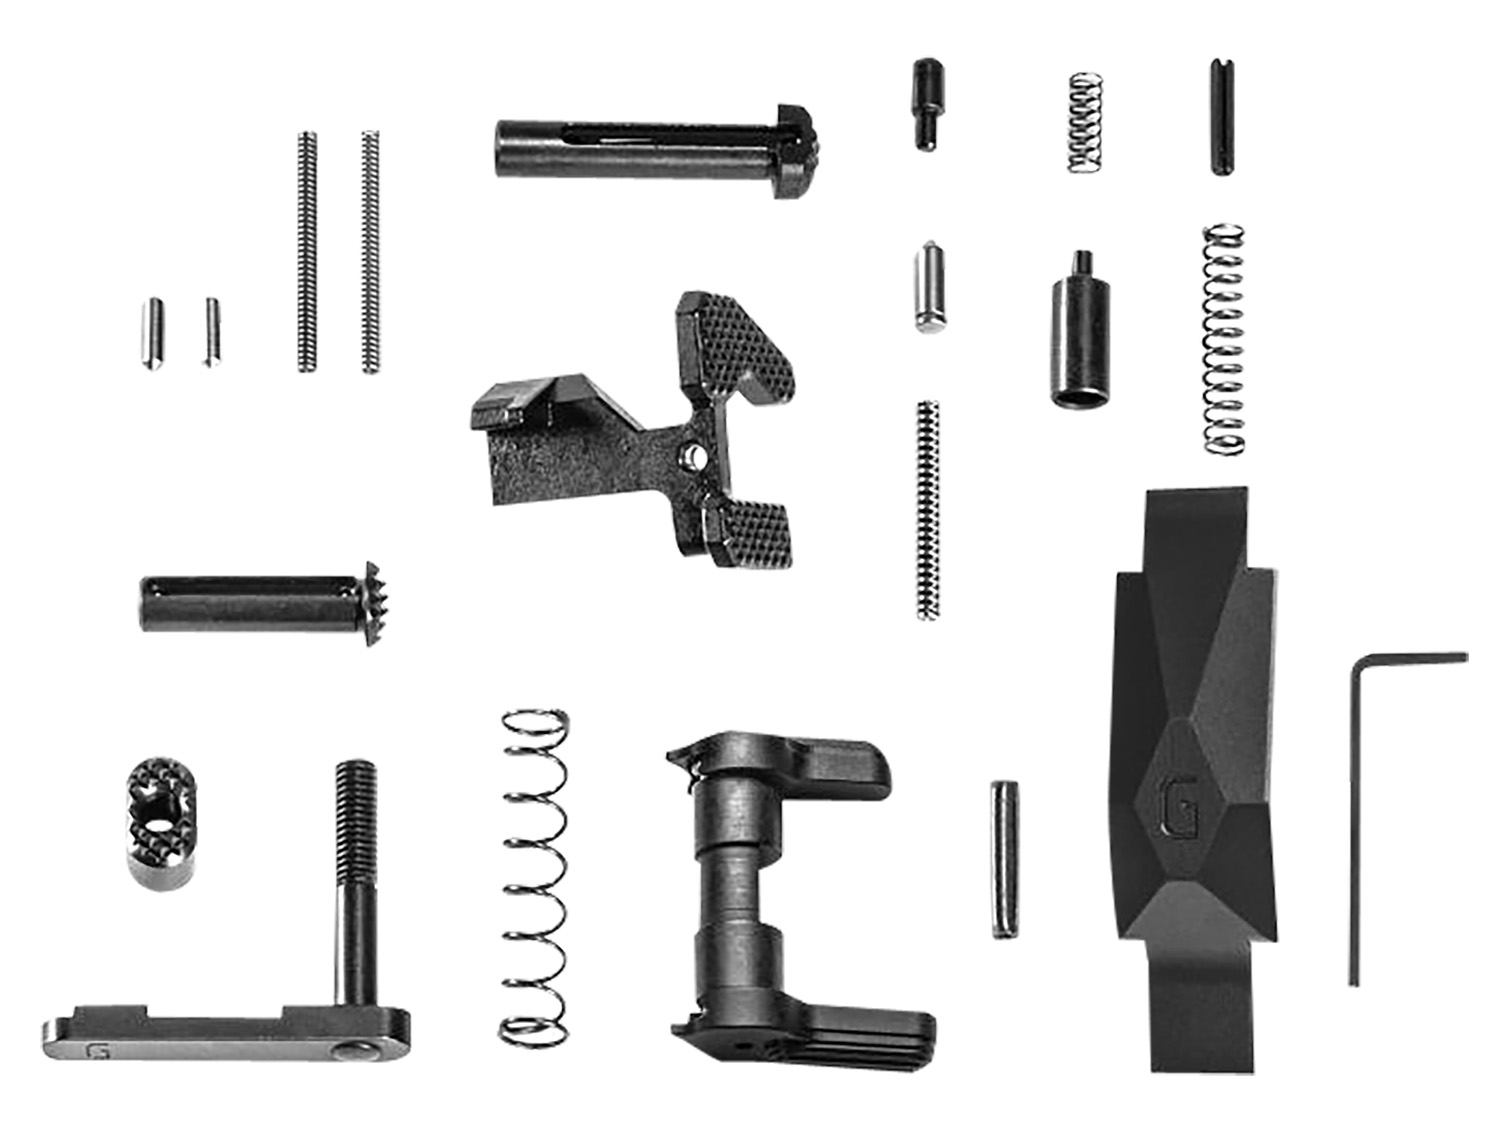 Geissele Automatics  Ultra Duty Lower Parts Kit Black, Ambi Safety, Oversized Bolt Release/Catch for AR-15